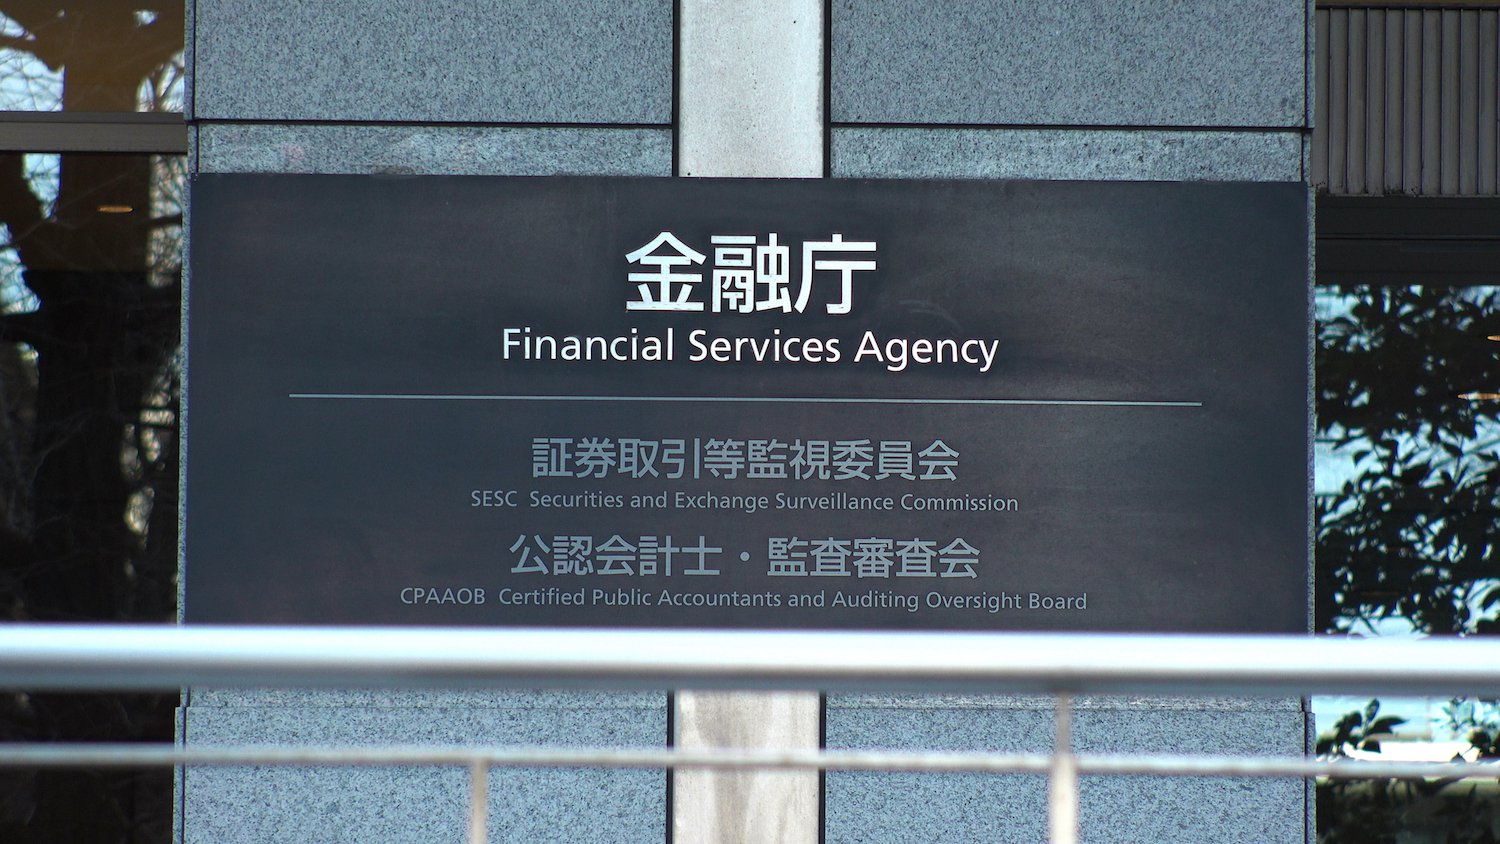 Japan’s FSA Expands Crypto Team To Handle Trading License Review